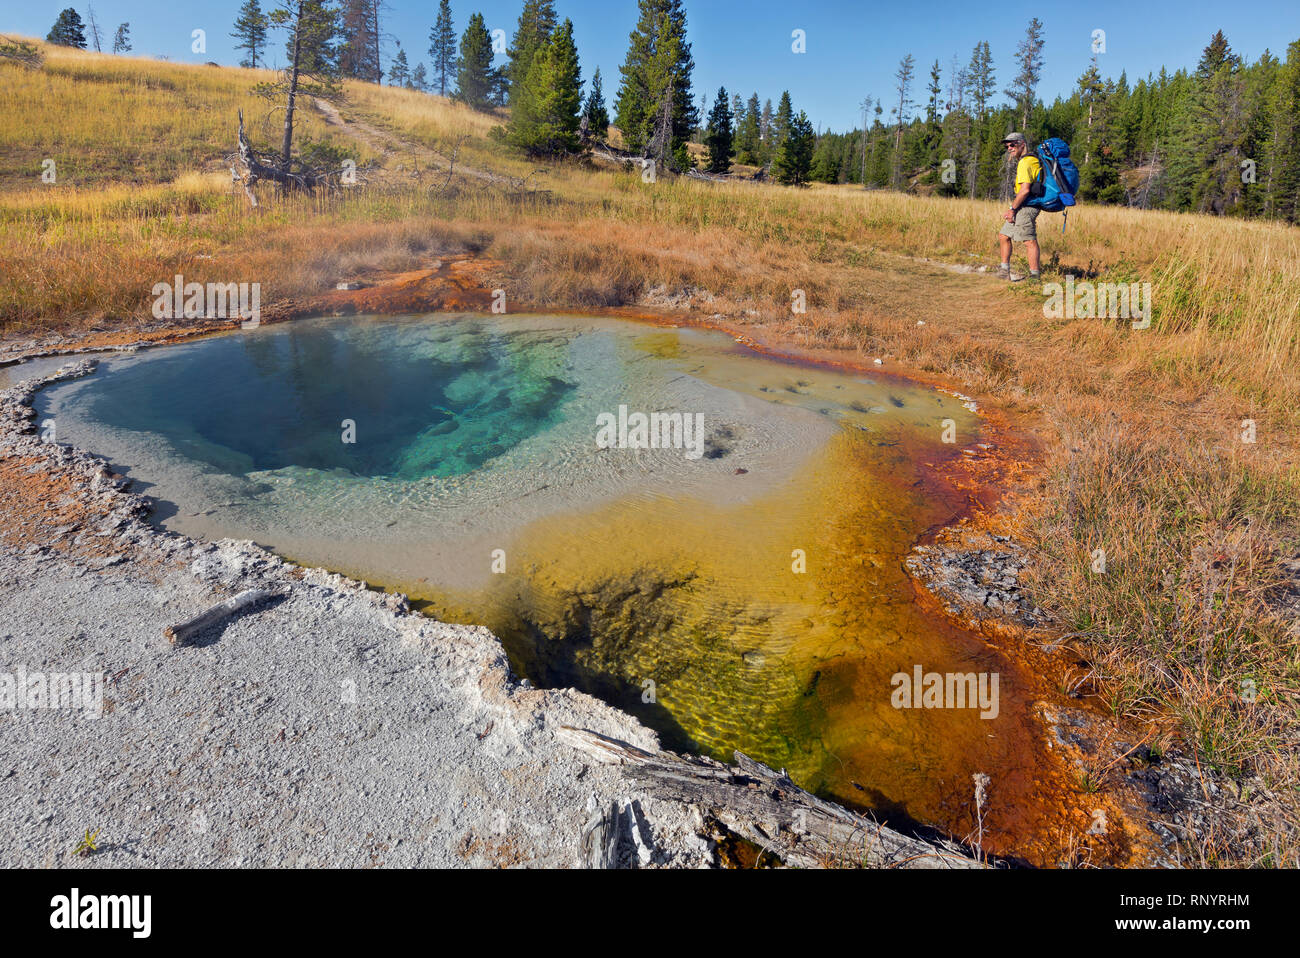 WY03821-00...WYOMING - Hiker passing a colorful hot spring, part of the Middle Group of the Heart Lake Geyser Basin in the backcountry of Yellowstone  Stock Photo